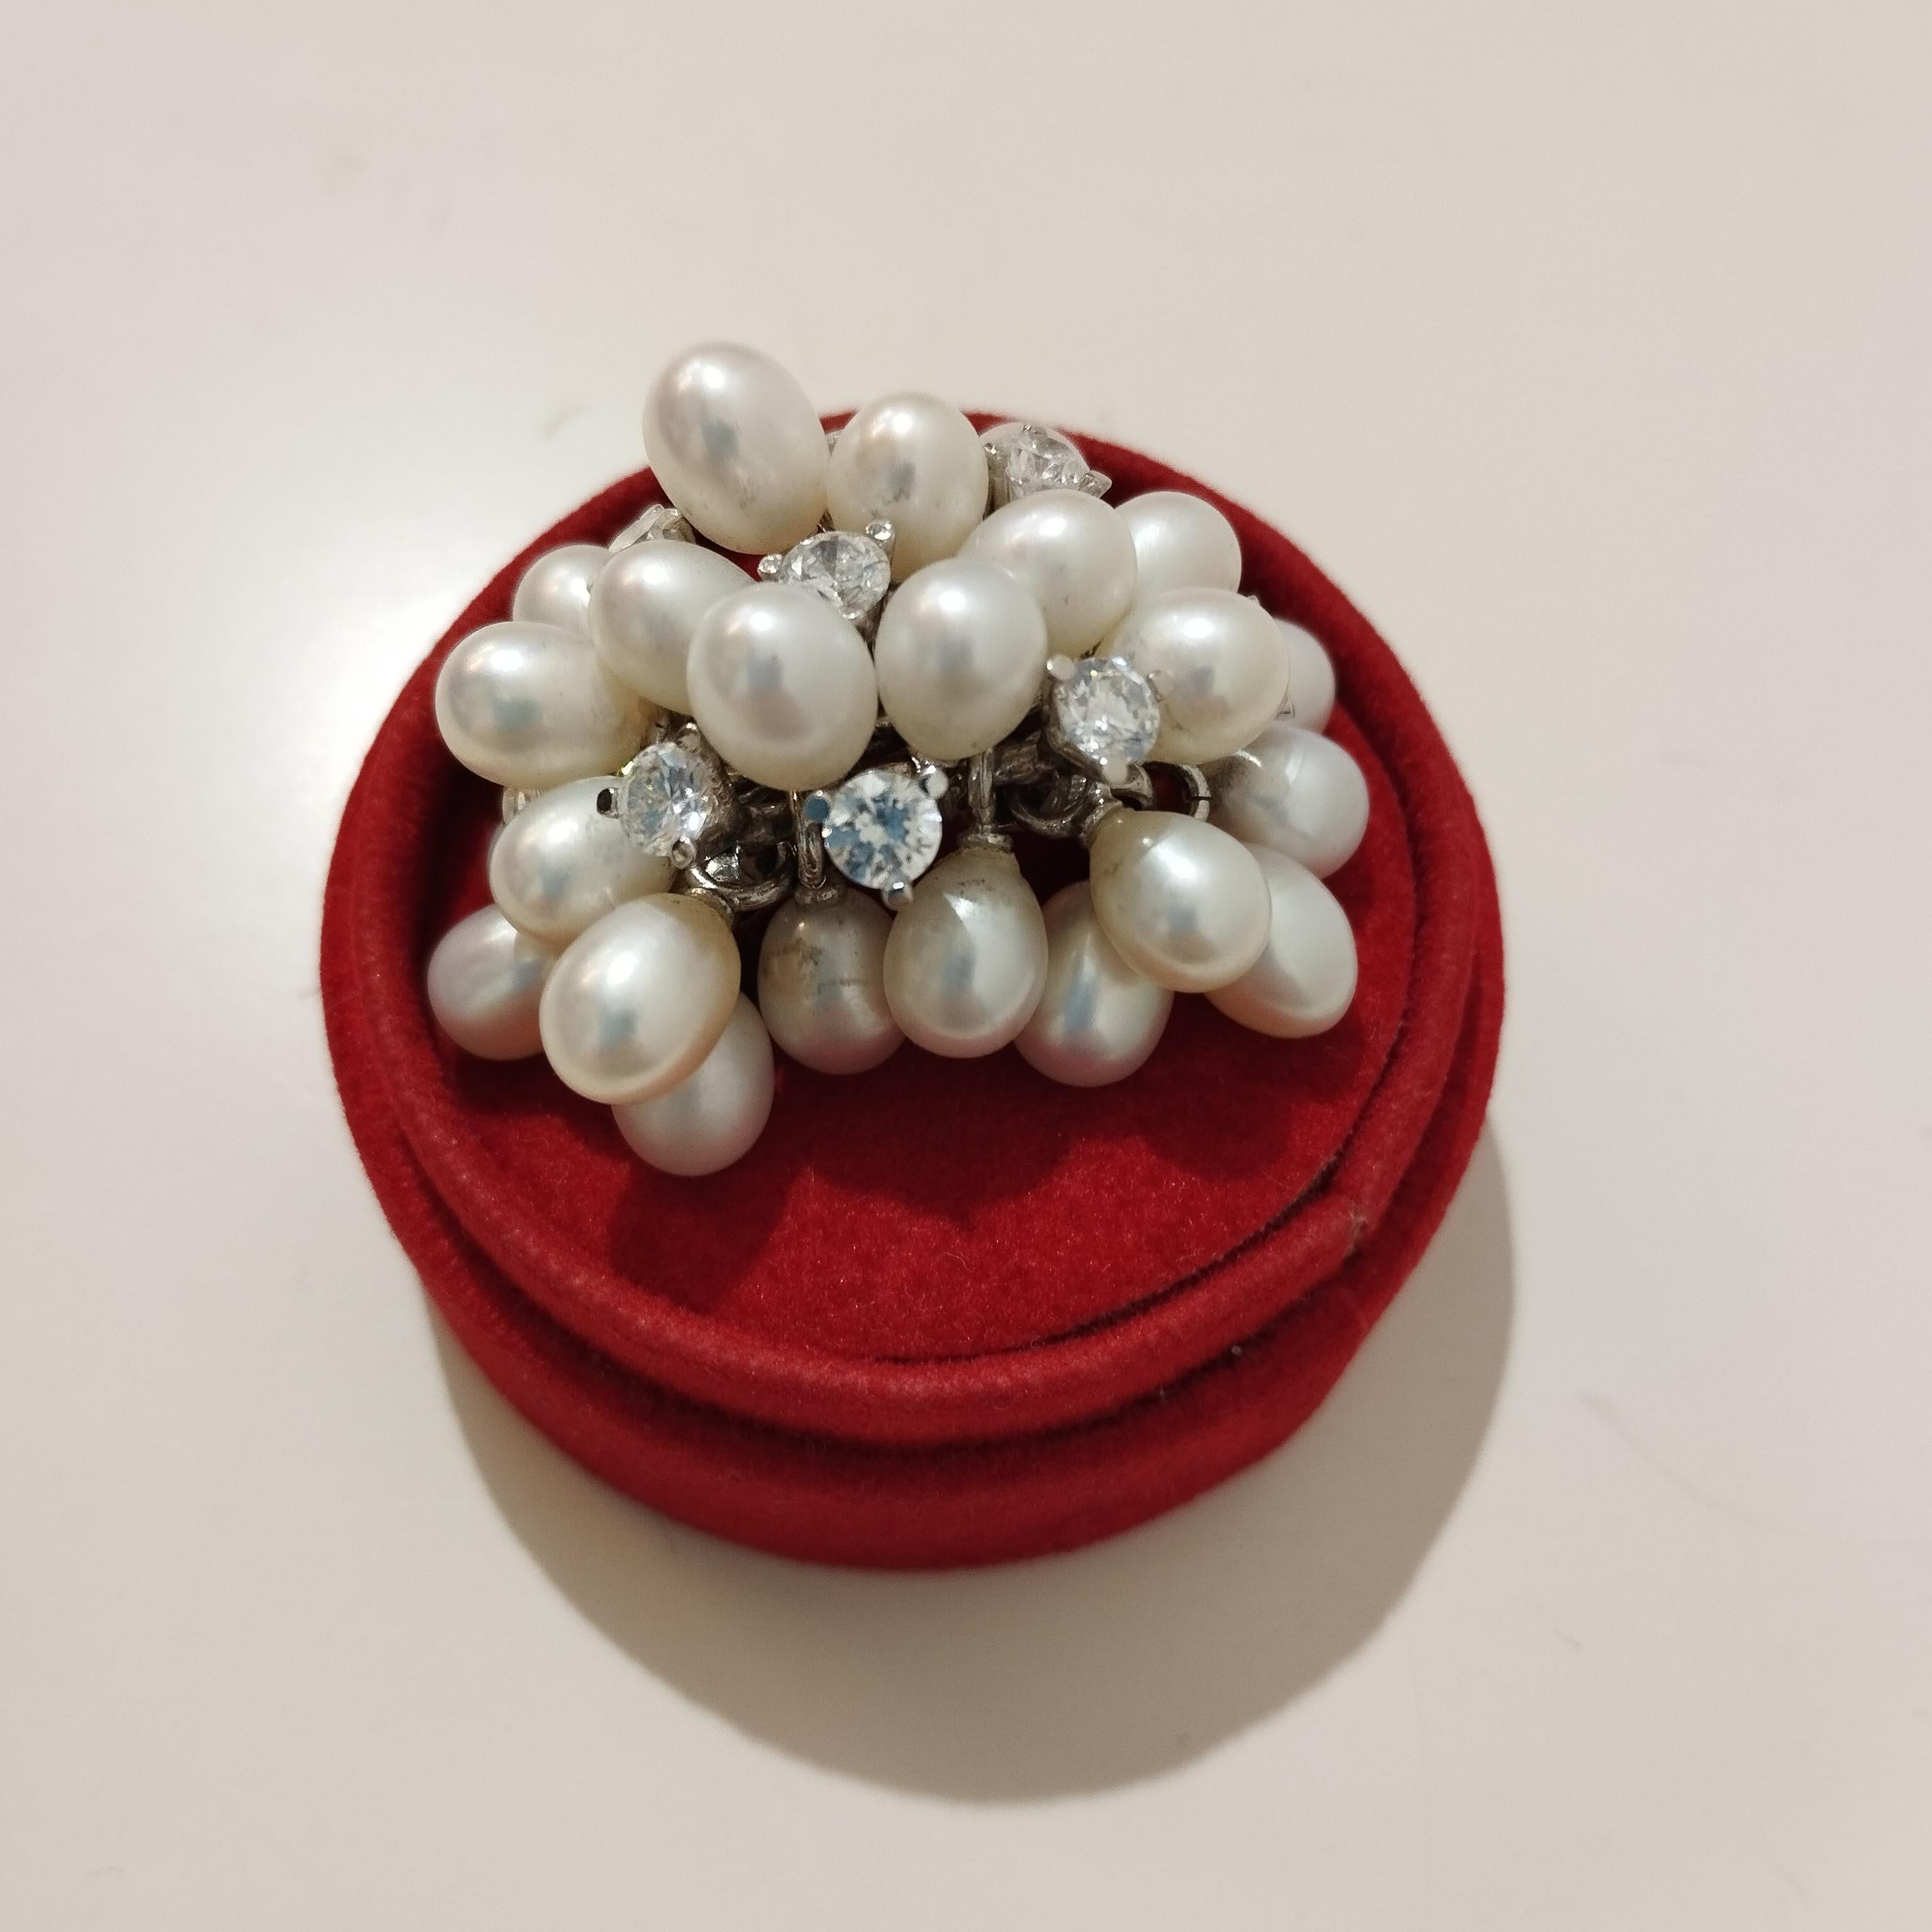 Fantastic ring, italian manufacture
White Gold
Pearls 
9 Zircons
Comes with beautiful red velvet and painted ring case
Size 10 Italian, FR 50, UK K, US 5
